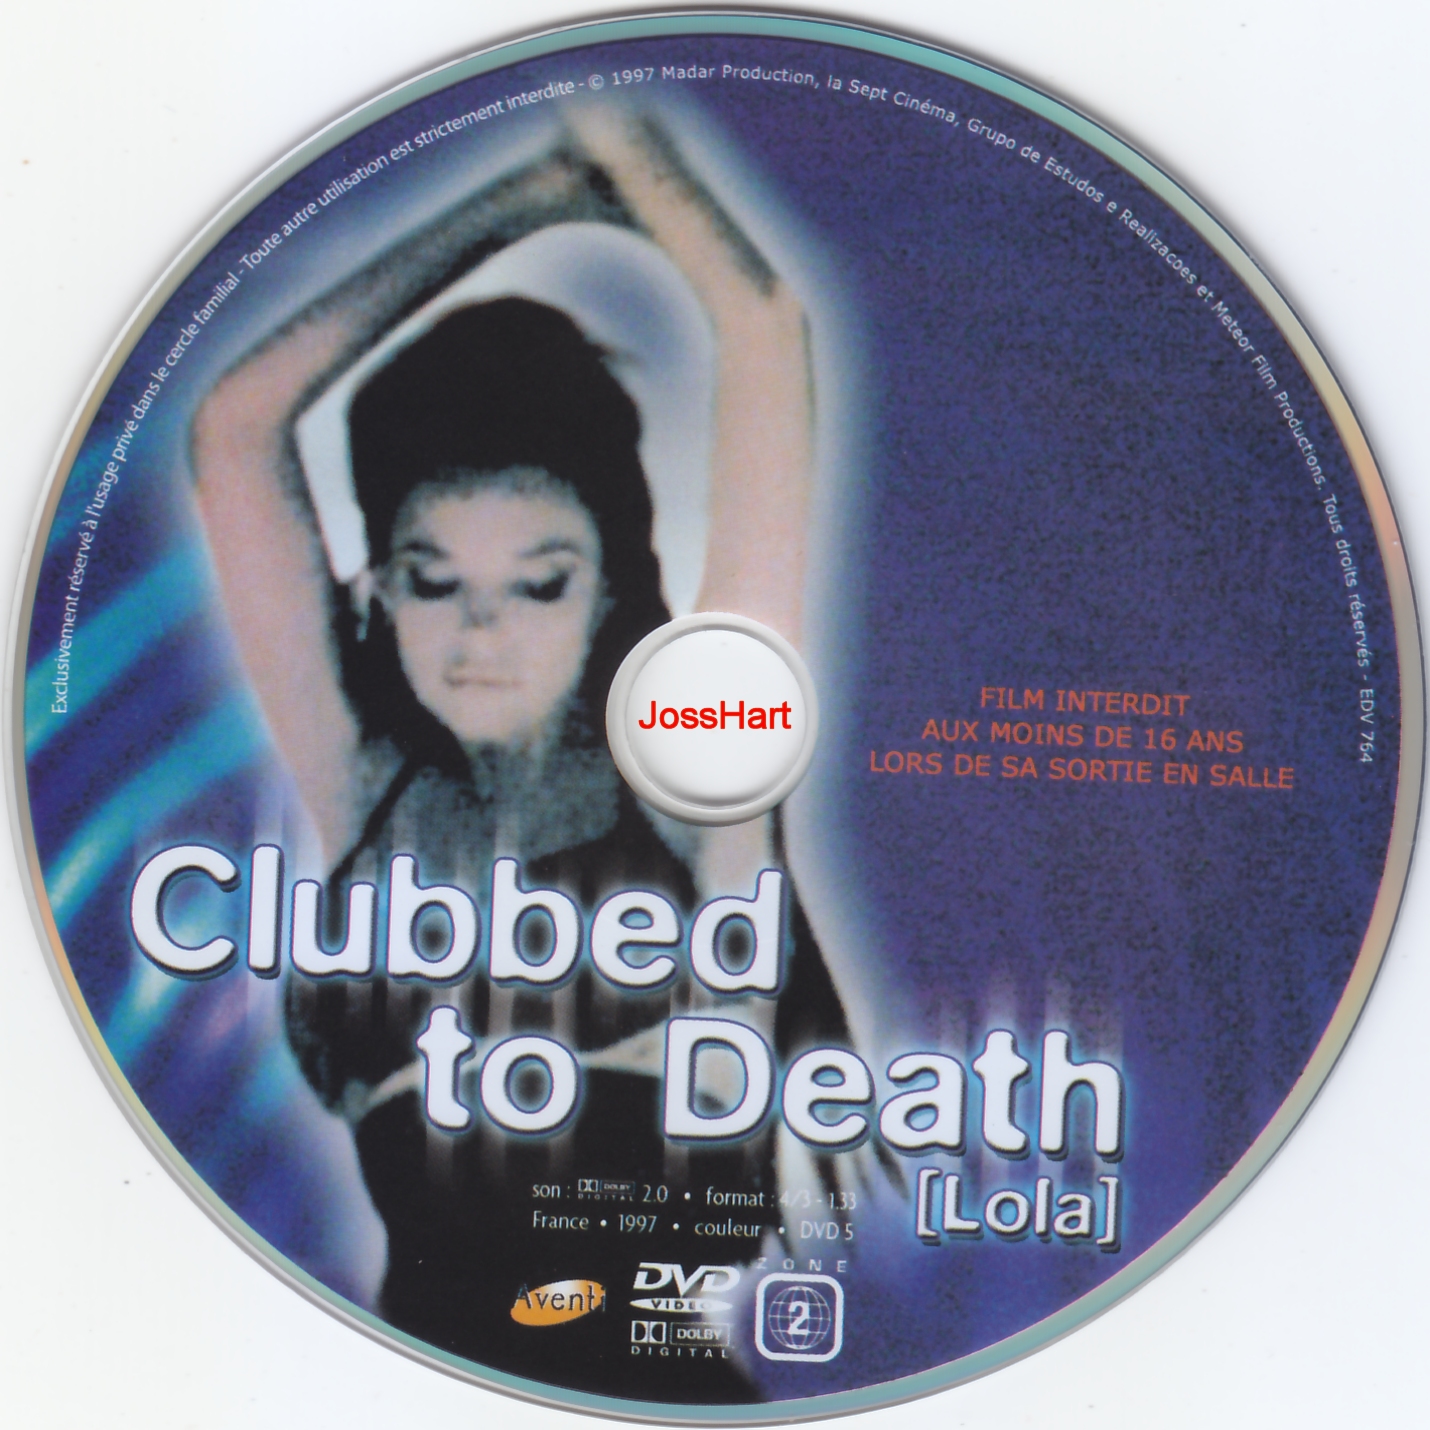 Clubbed to death